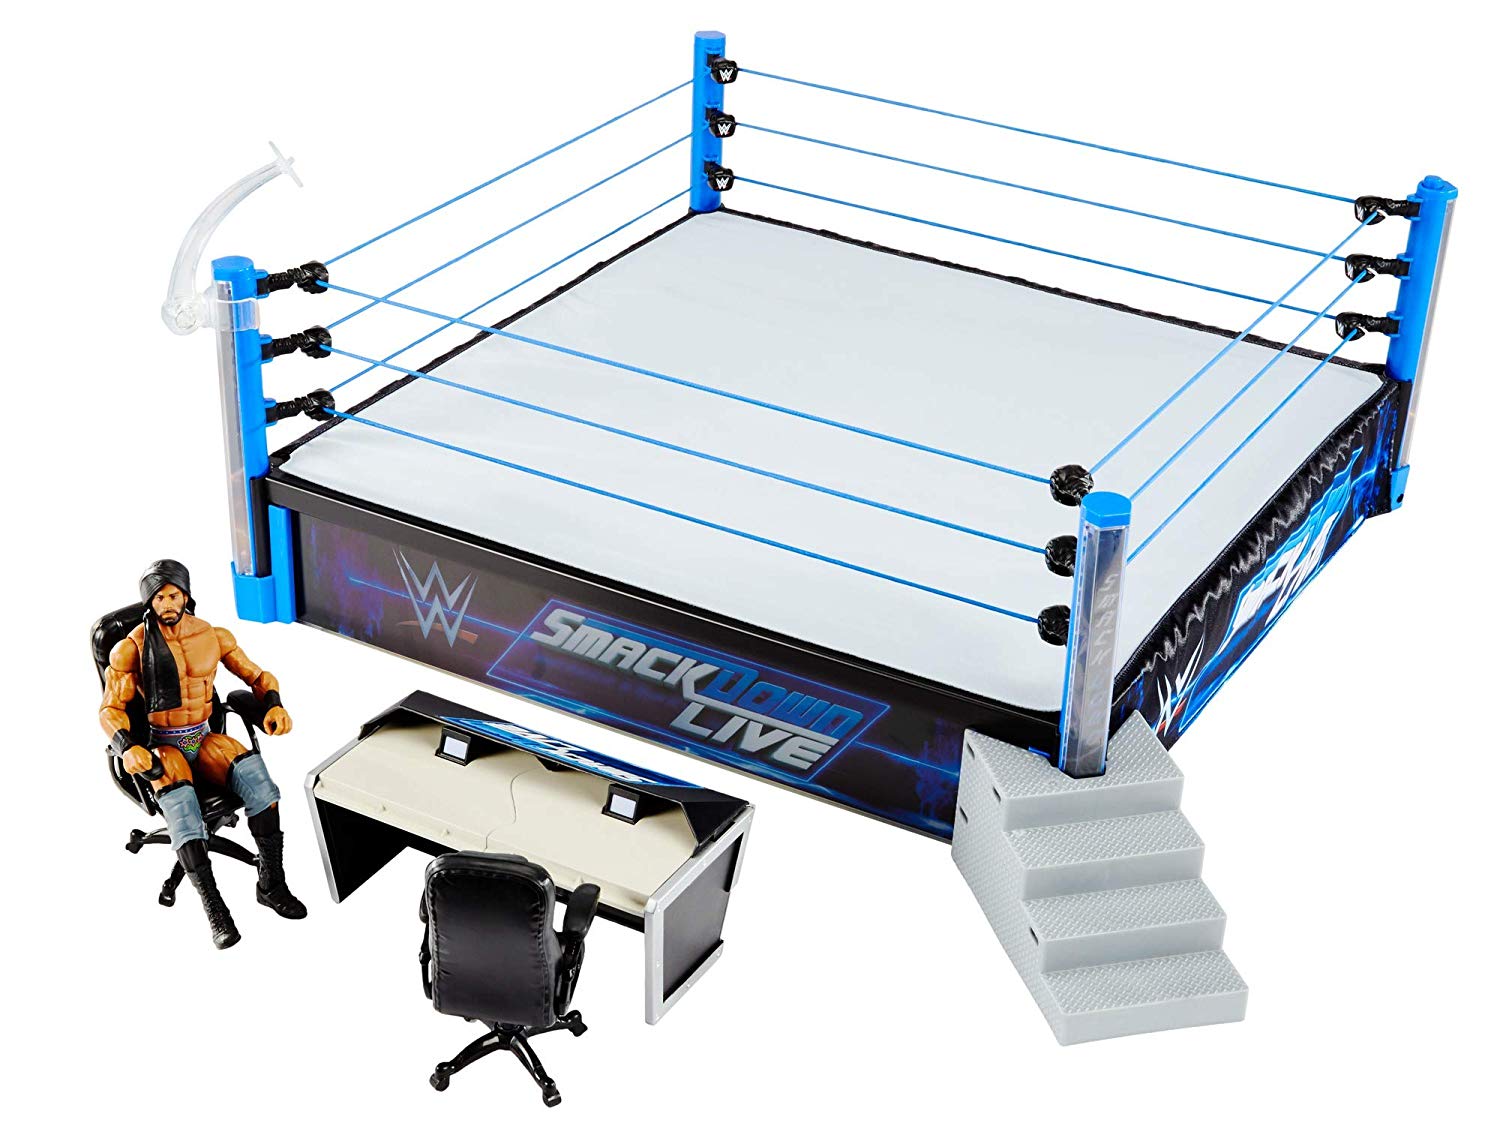 WWE Smackdown Live Main Event Ring $55.89 | Rock Figure $13.93 - Amazon